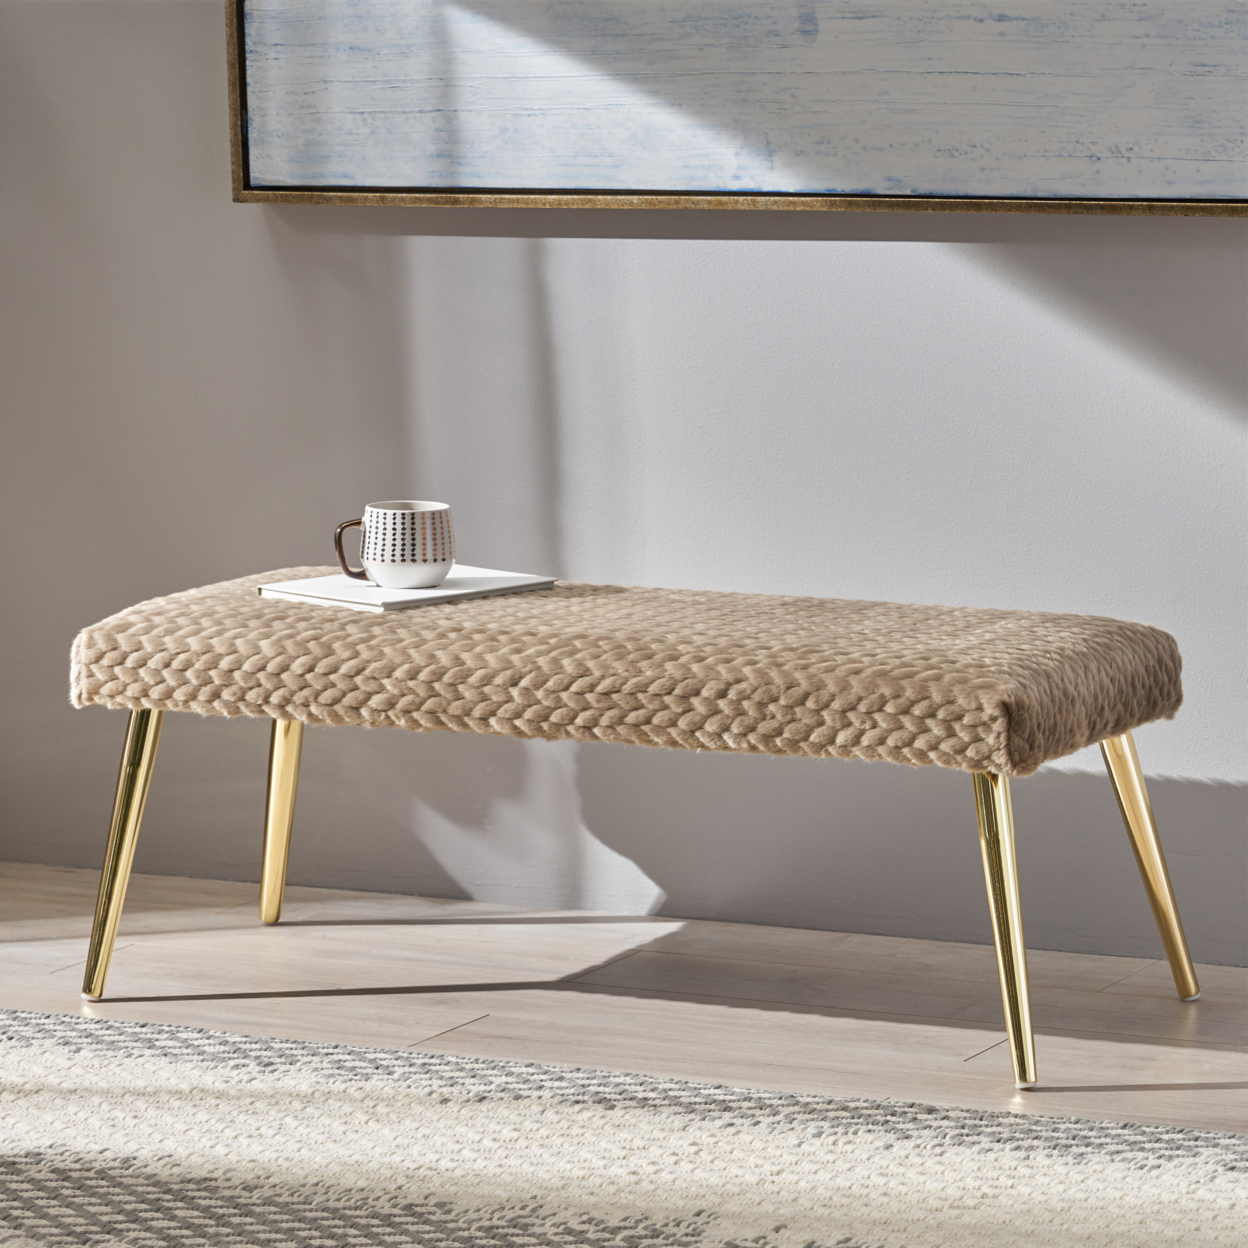 Indira Patterned Faux Fur Bench - White + Gold Finish